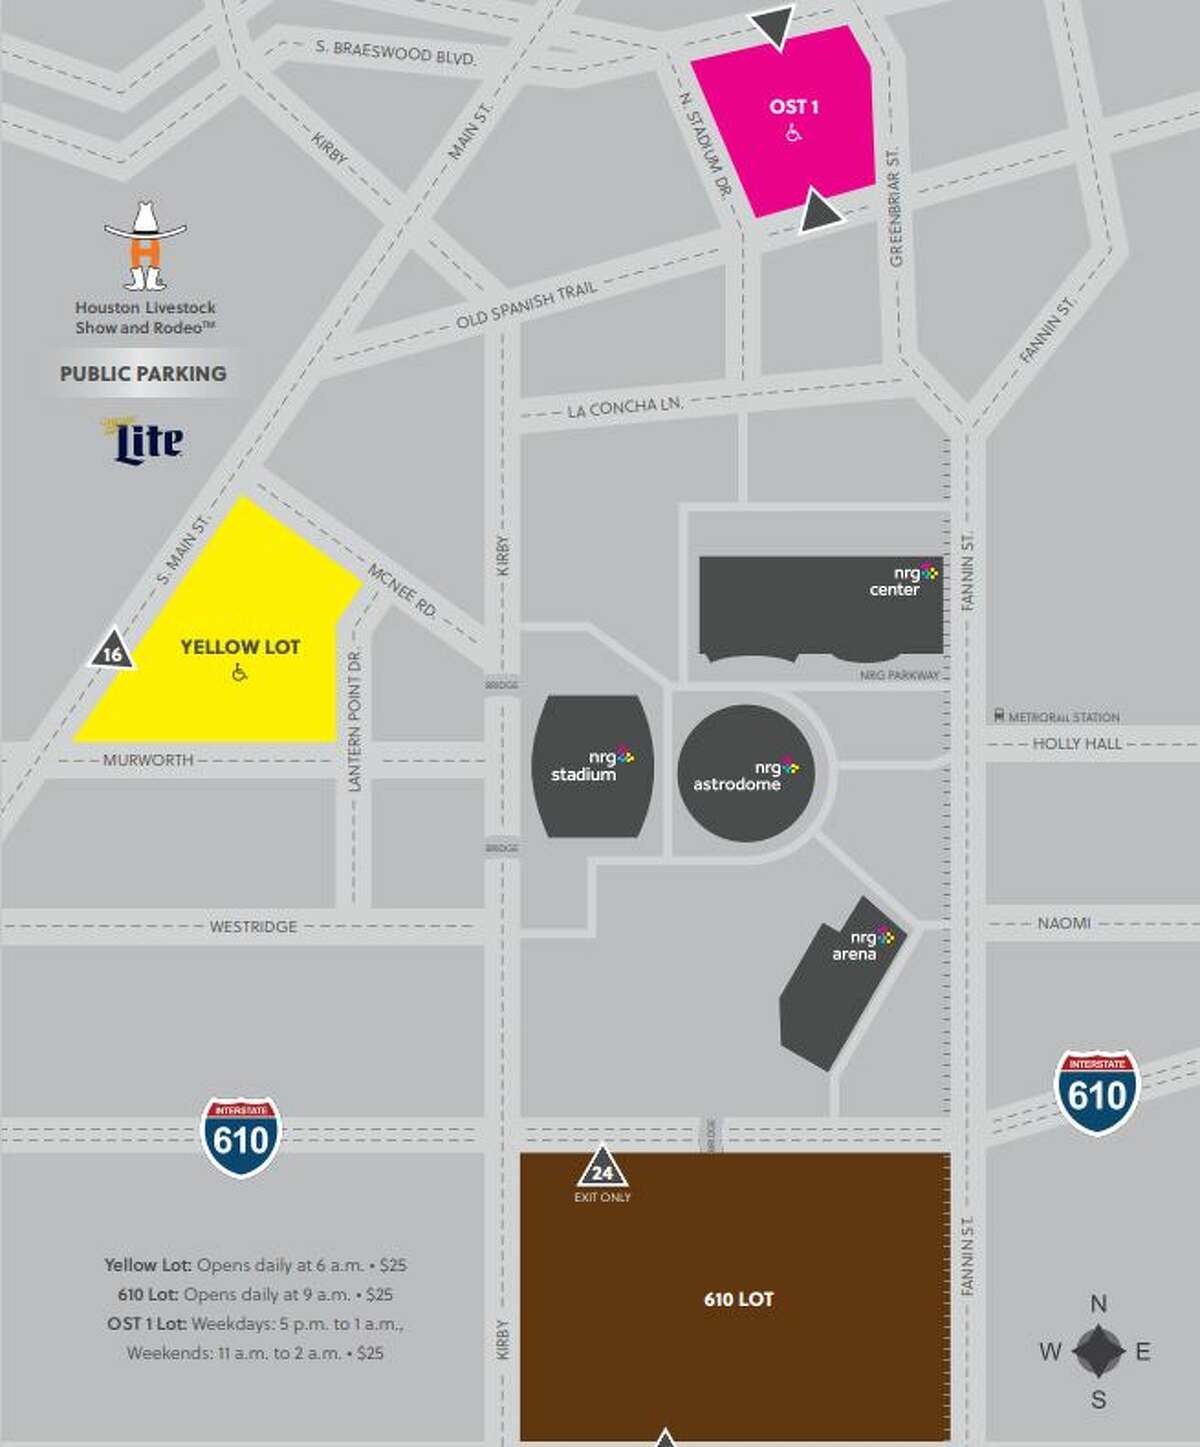 A map shows public parking lots available near NRG Park for the Houston Livestock Show and Rodeo. 